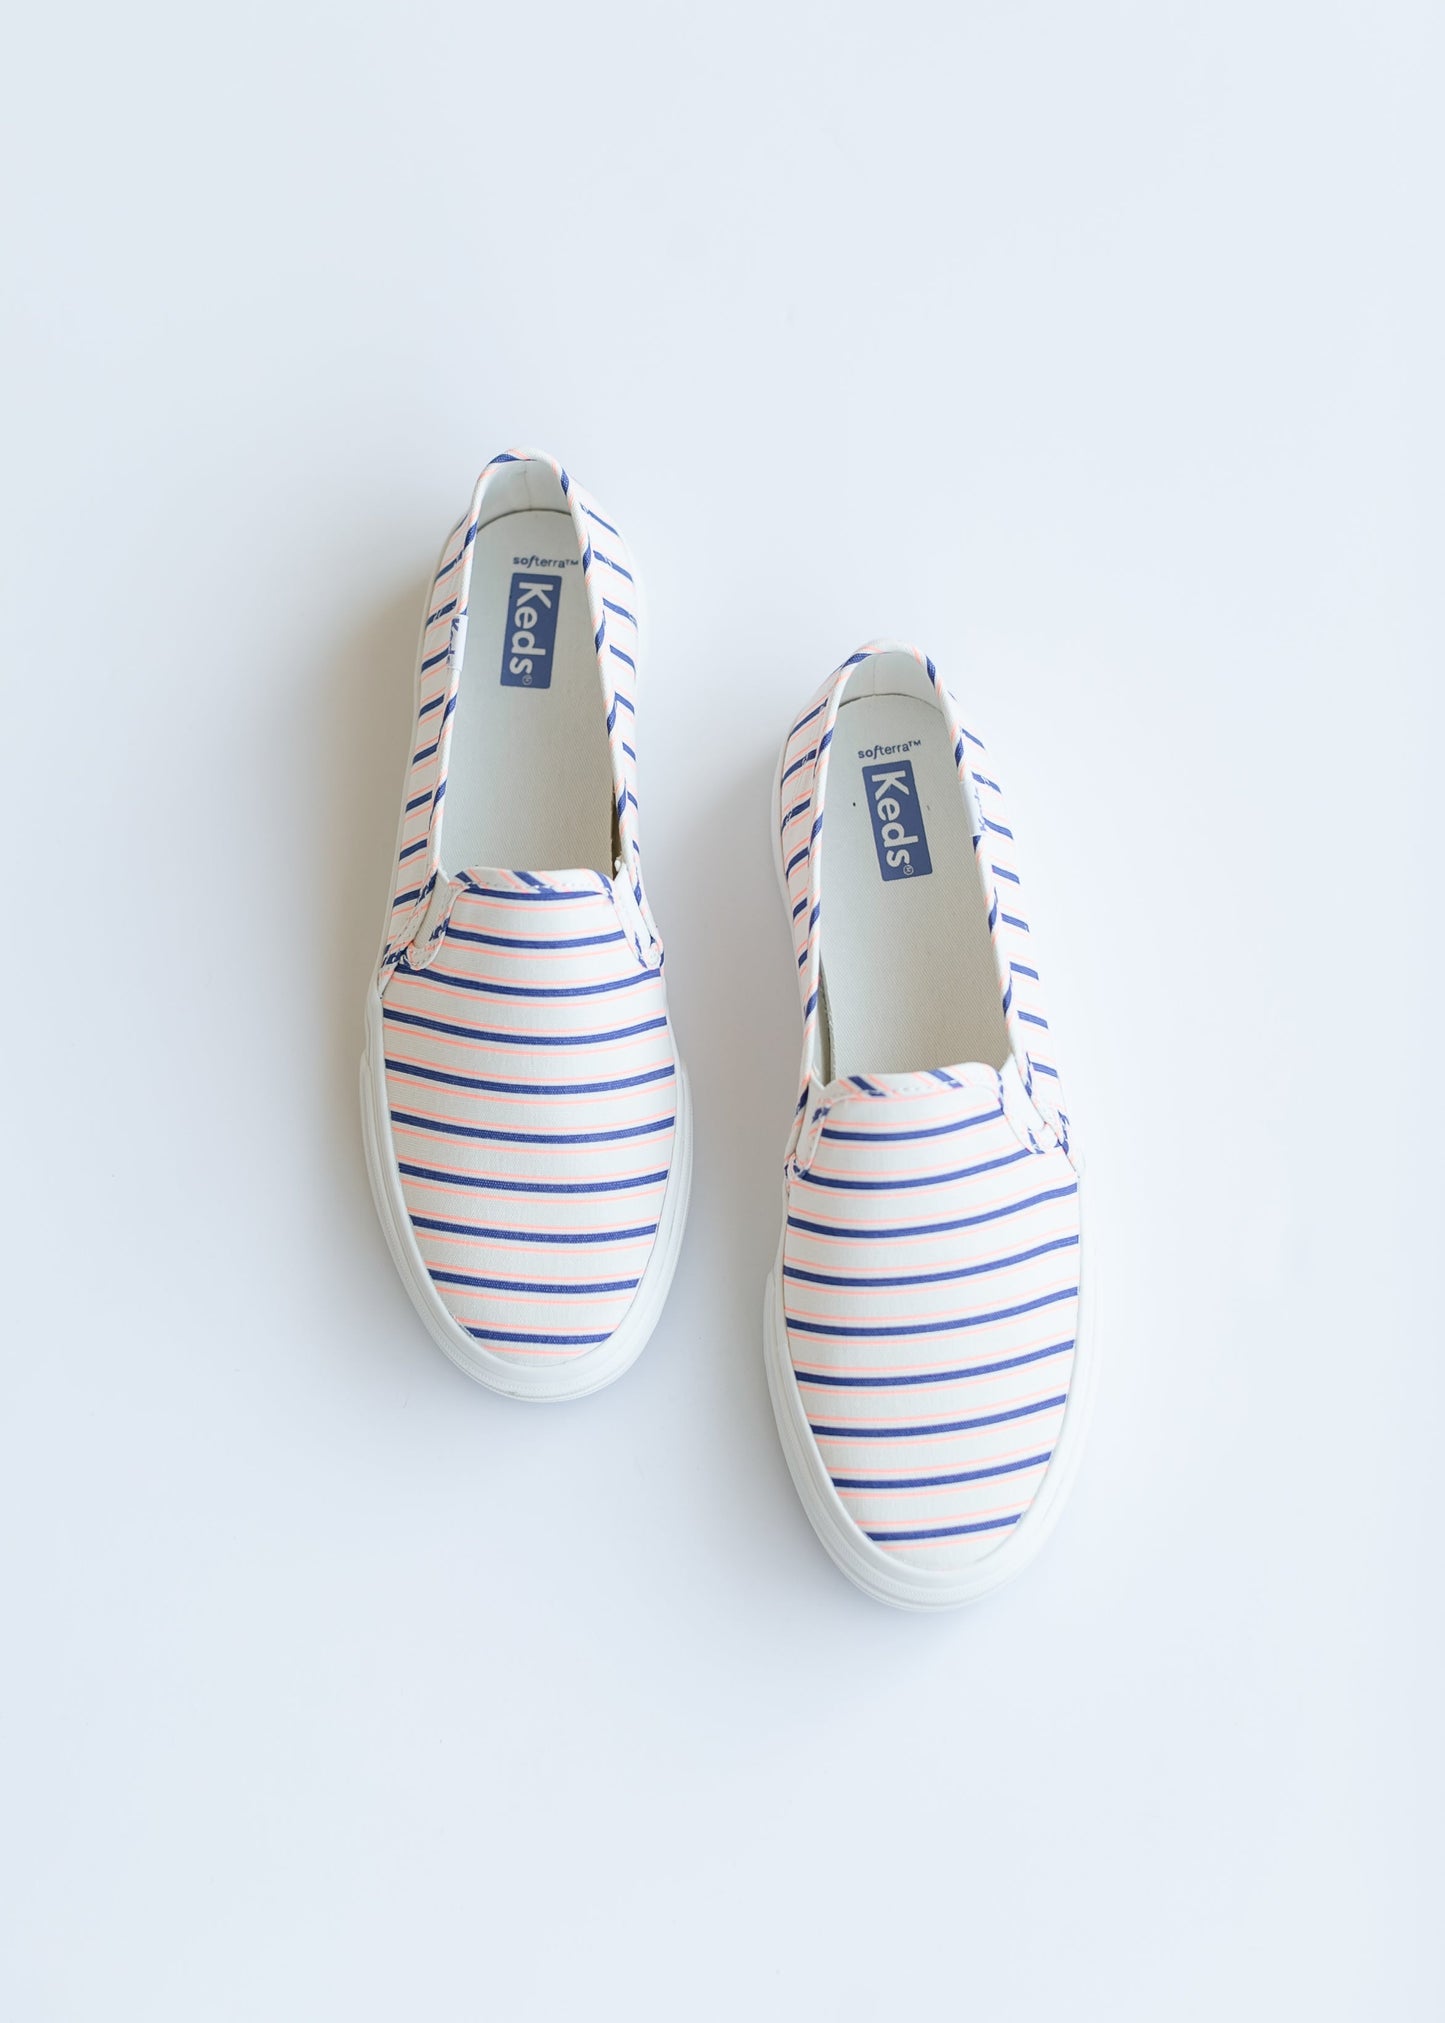 Keds® Double Decker Striped Sneakers Shoes